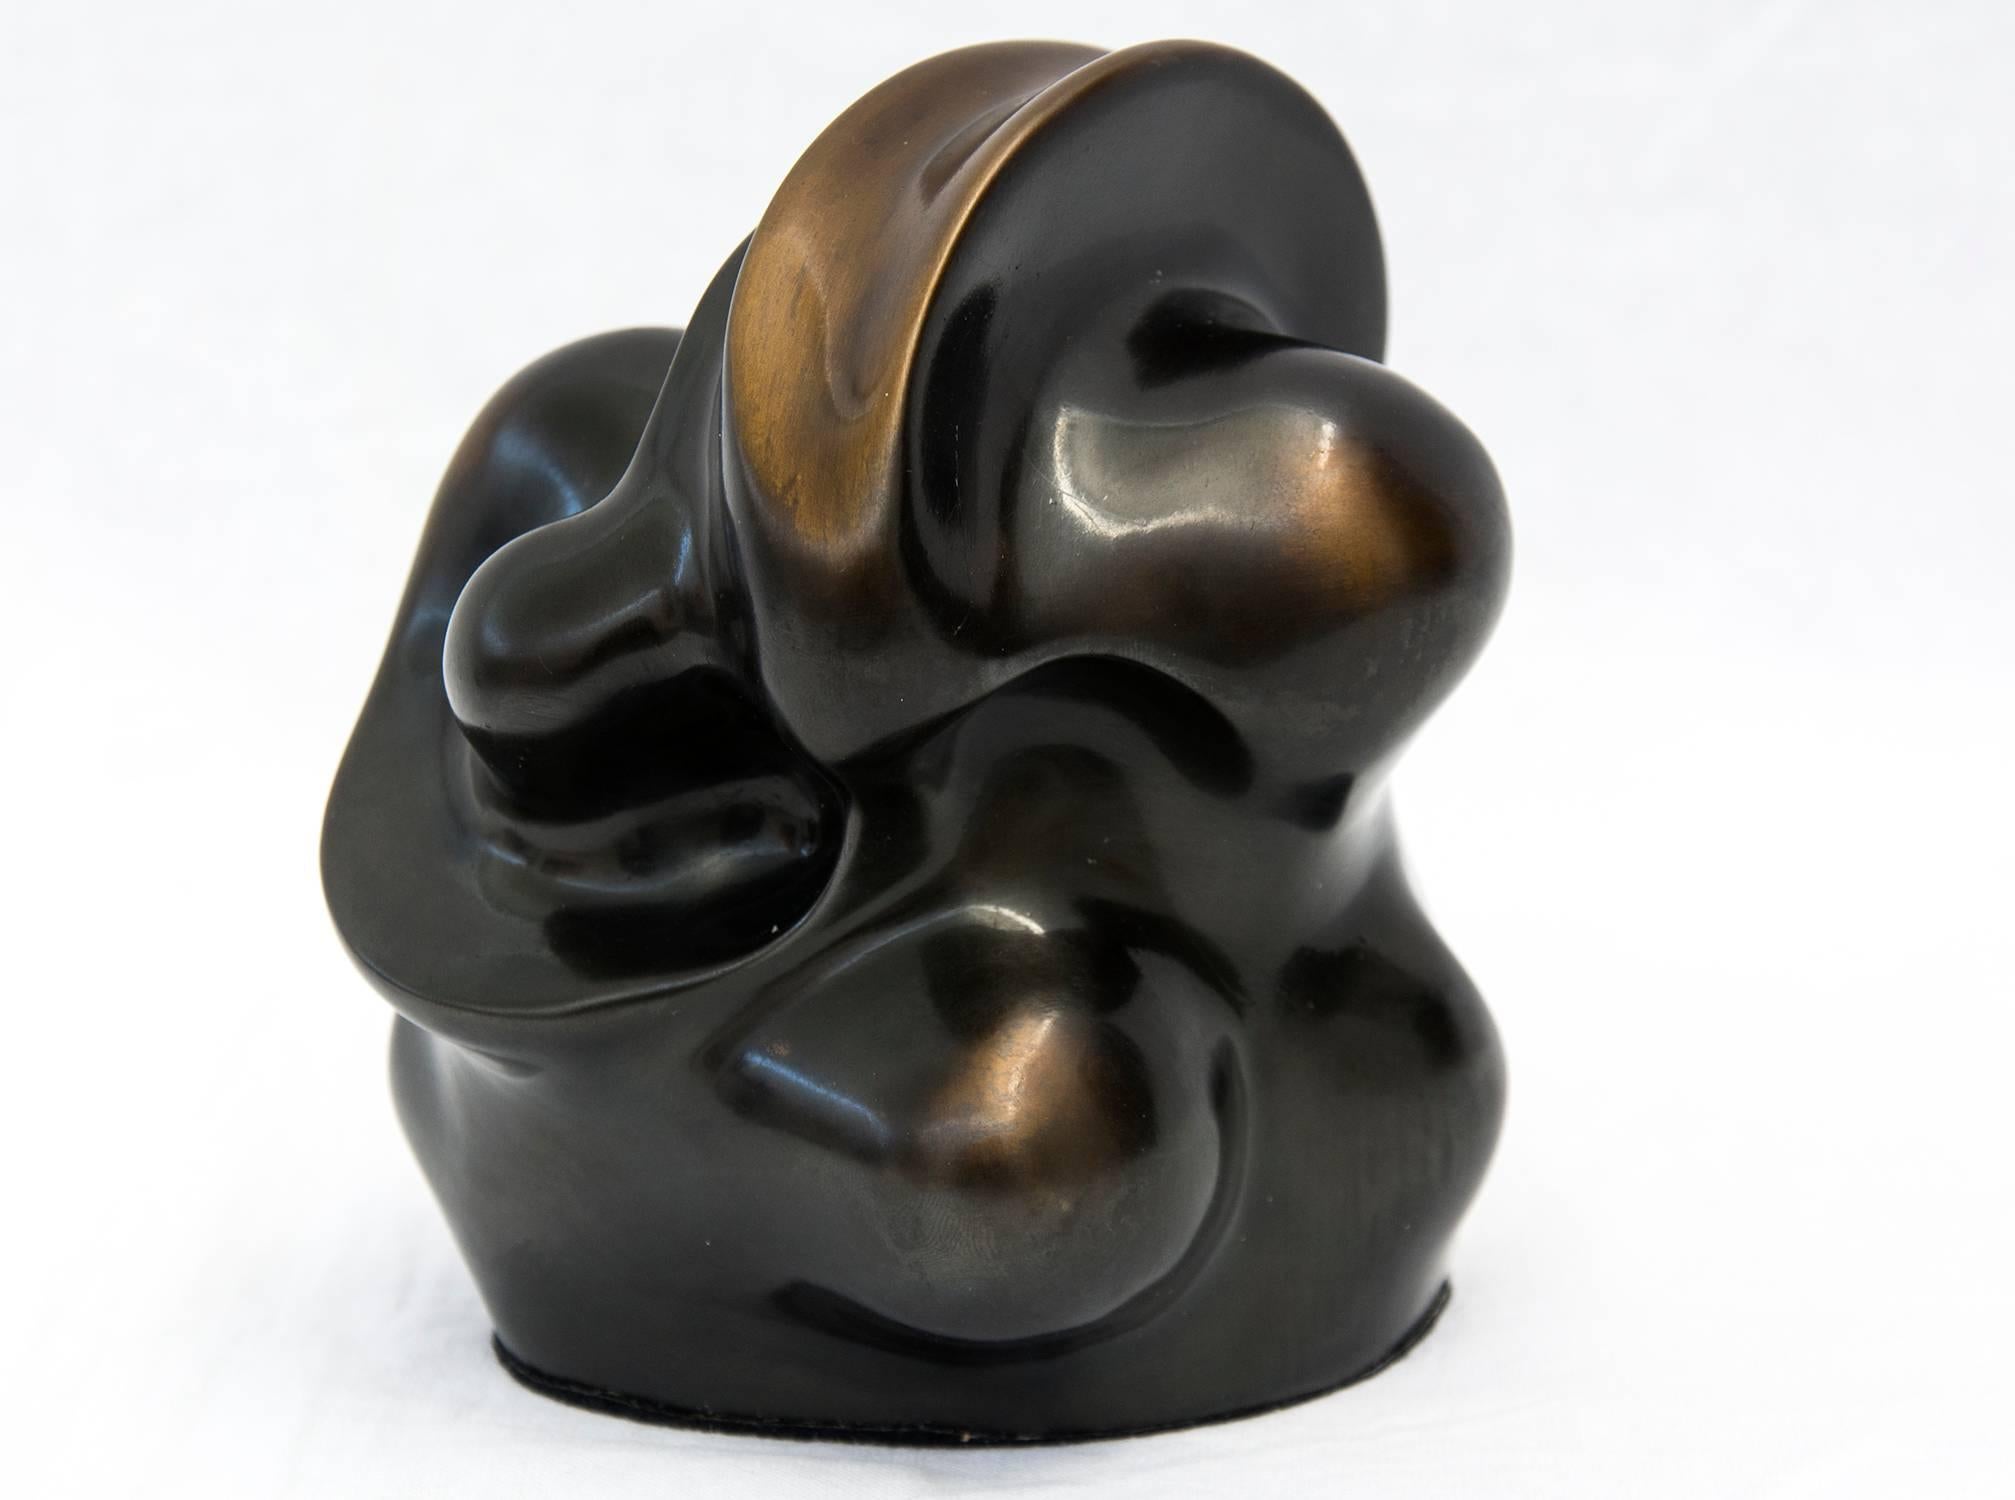 Grace AP - small, smooth, swirling, abstract bronze sculpture - Sculpture by Tim Forbes